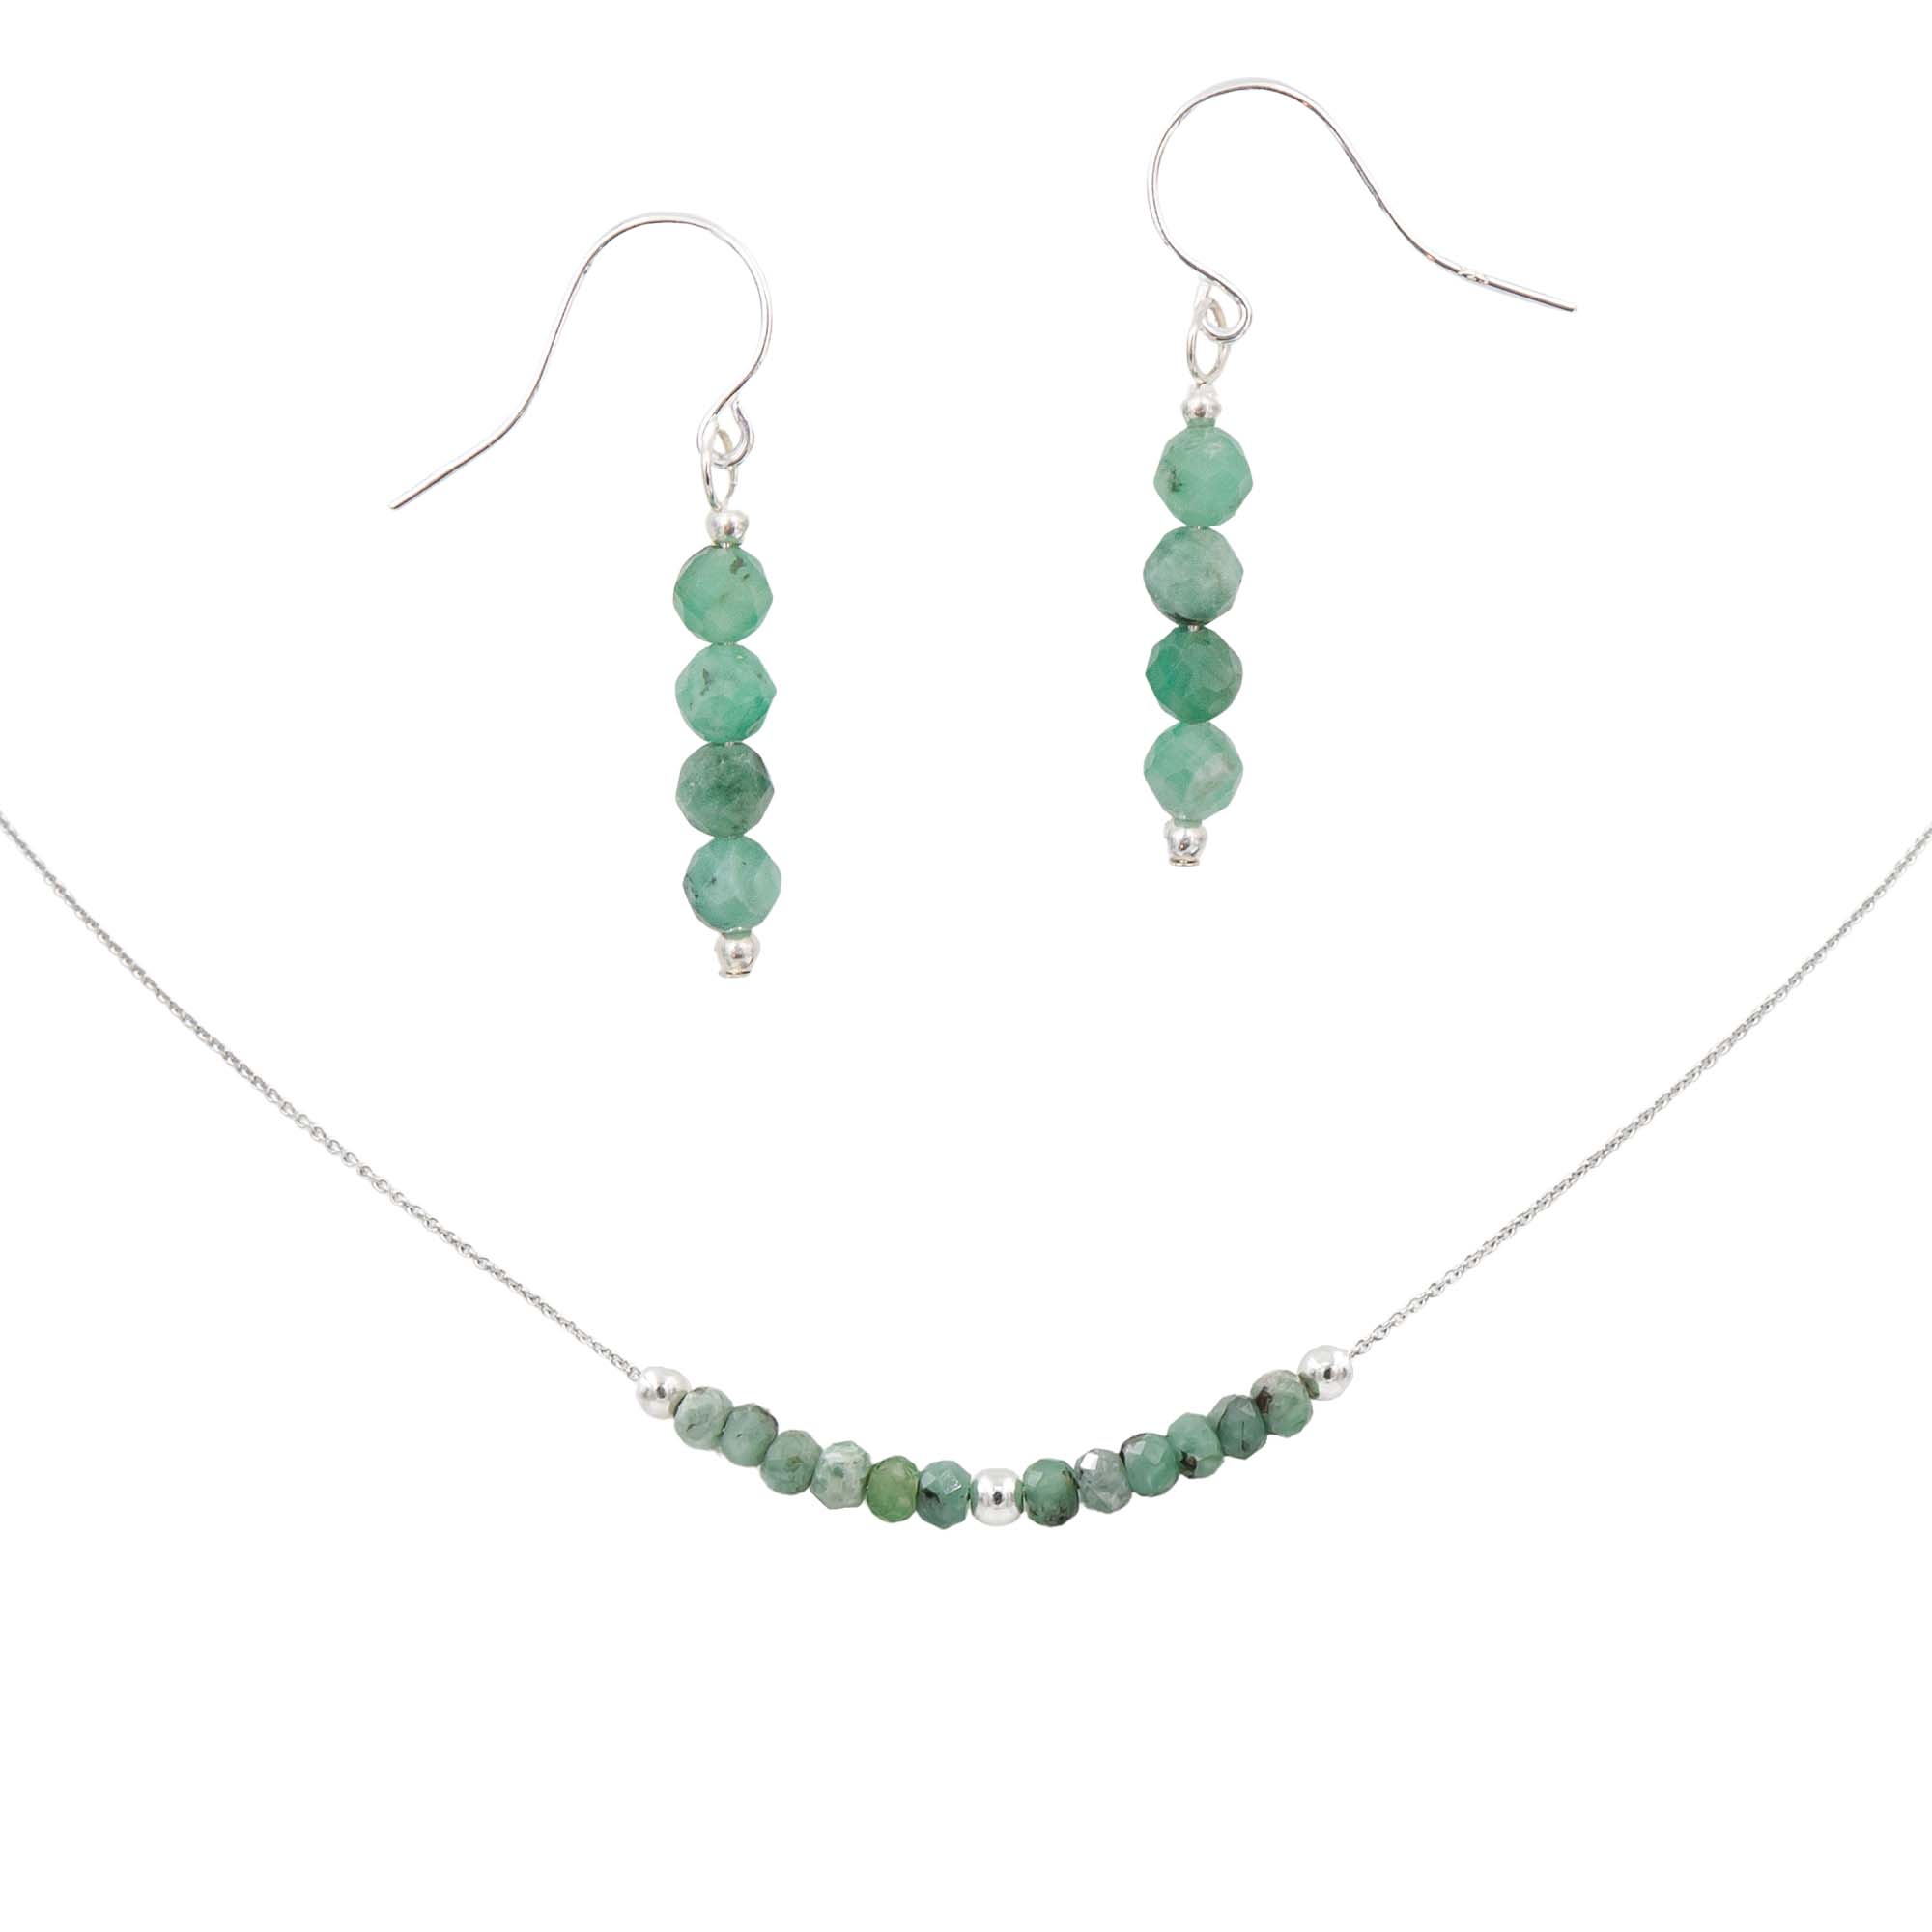  Earth Song Jewelry ~ Raw Emeralds Sterling Silver Handmade Necklace & Earrings